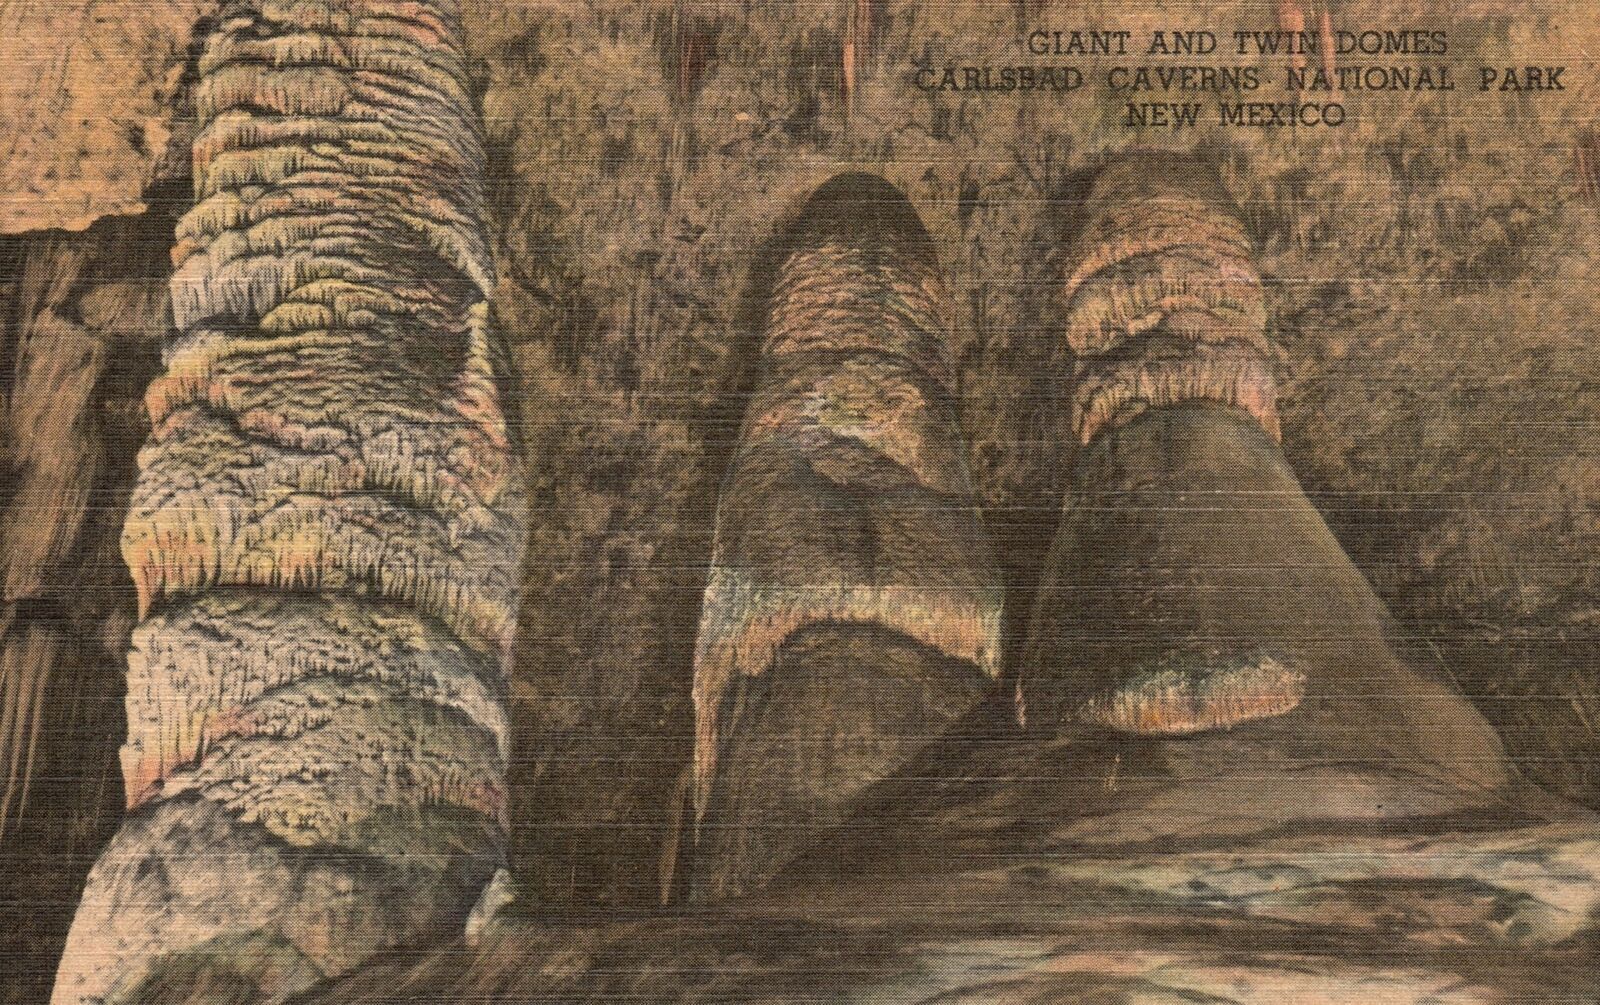 Vintage Postcard Giant And Twin Domes Carlsbad Caverns National Park New Mexico